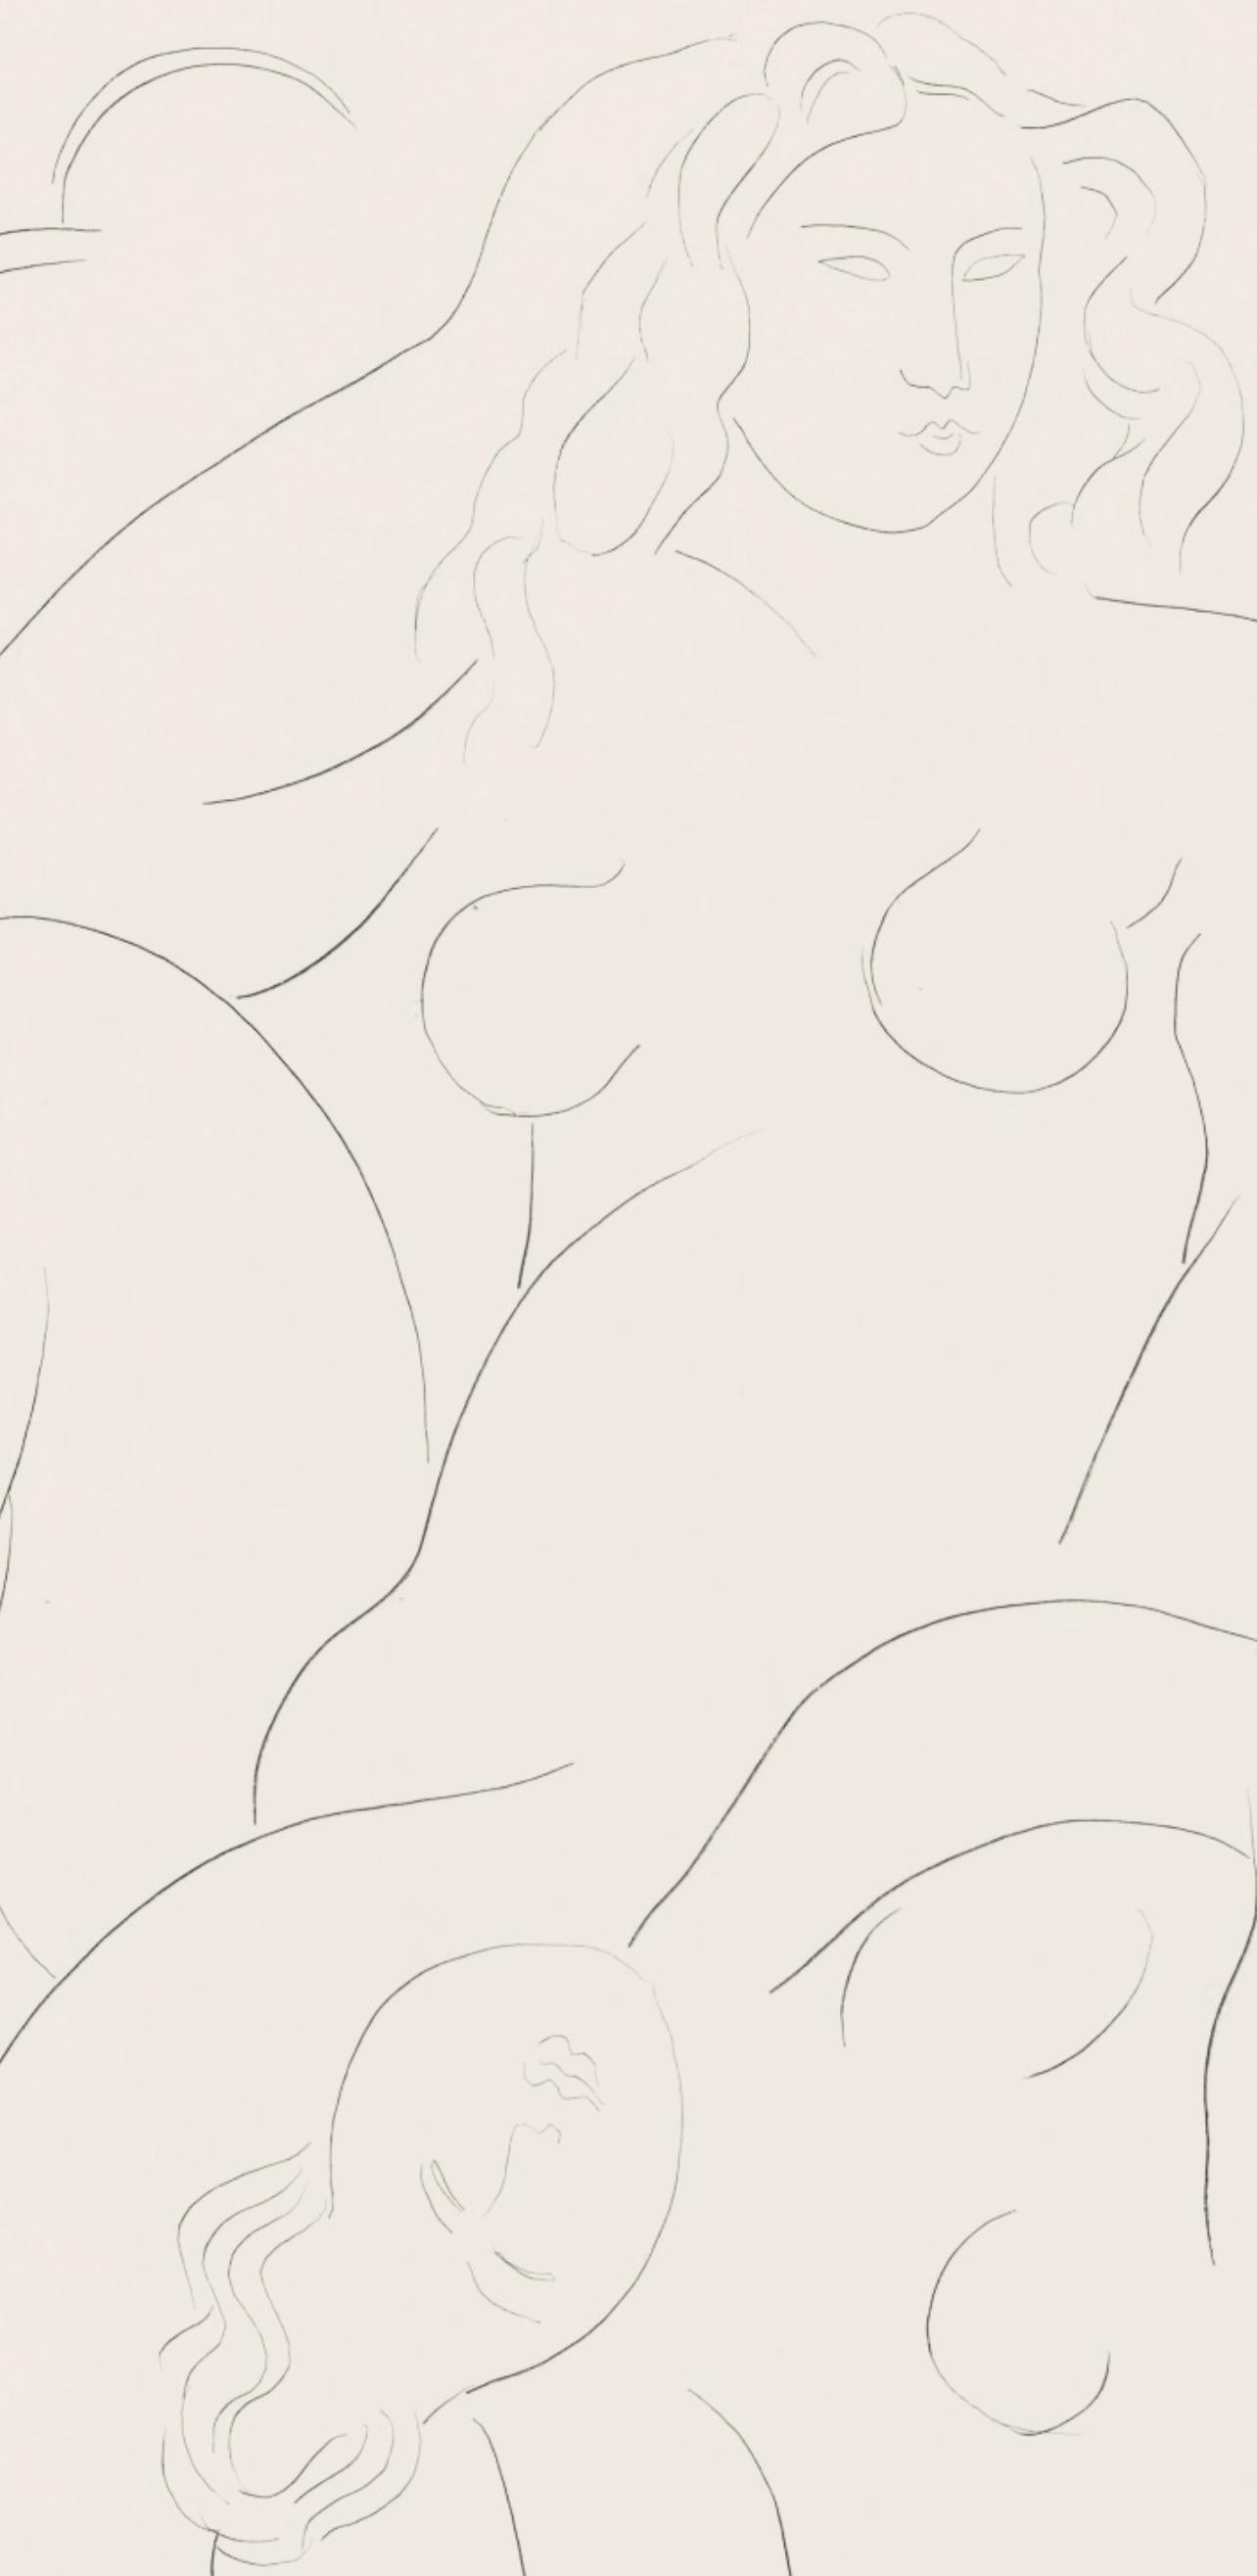 Matisse, Les Nymphes (The Nymphs), Poésies (after) - Print by Henri Matisse